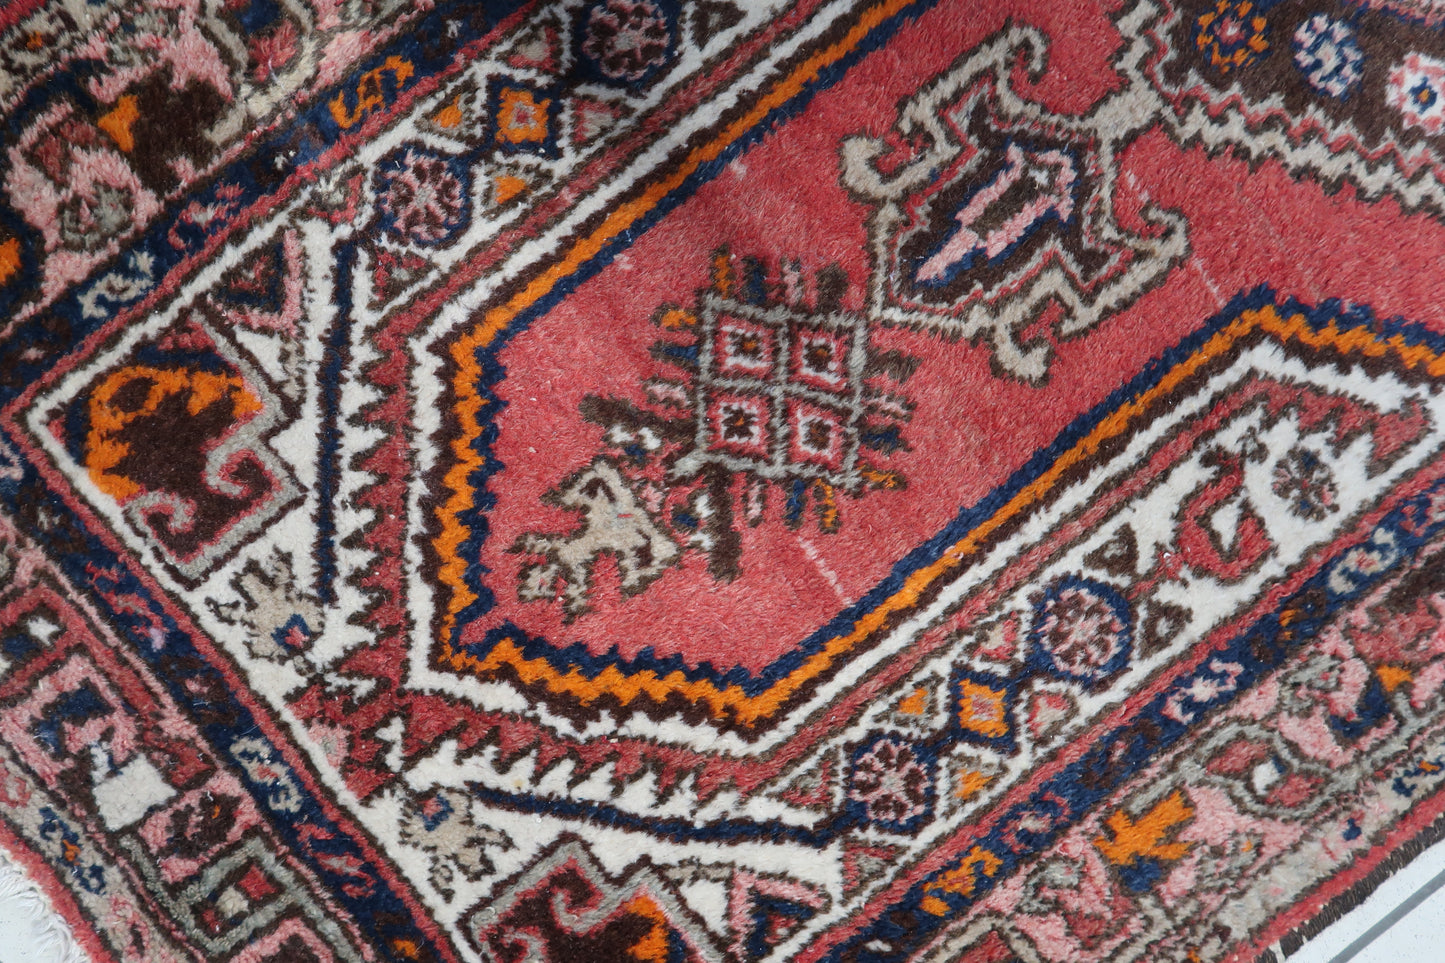 Close-up showcasing the vibrant red background and traditional design of the Persian Hamadan rug